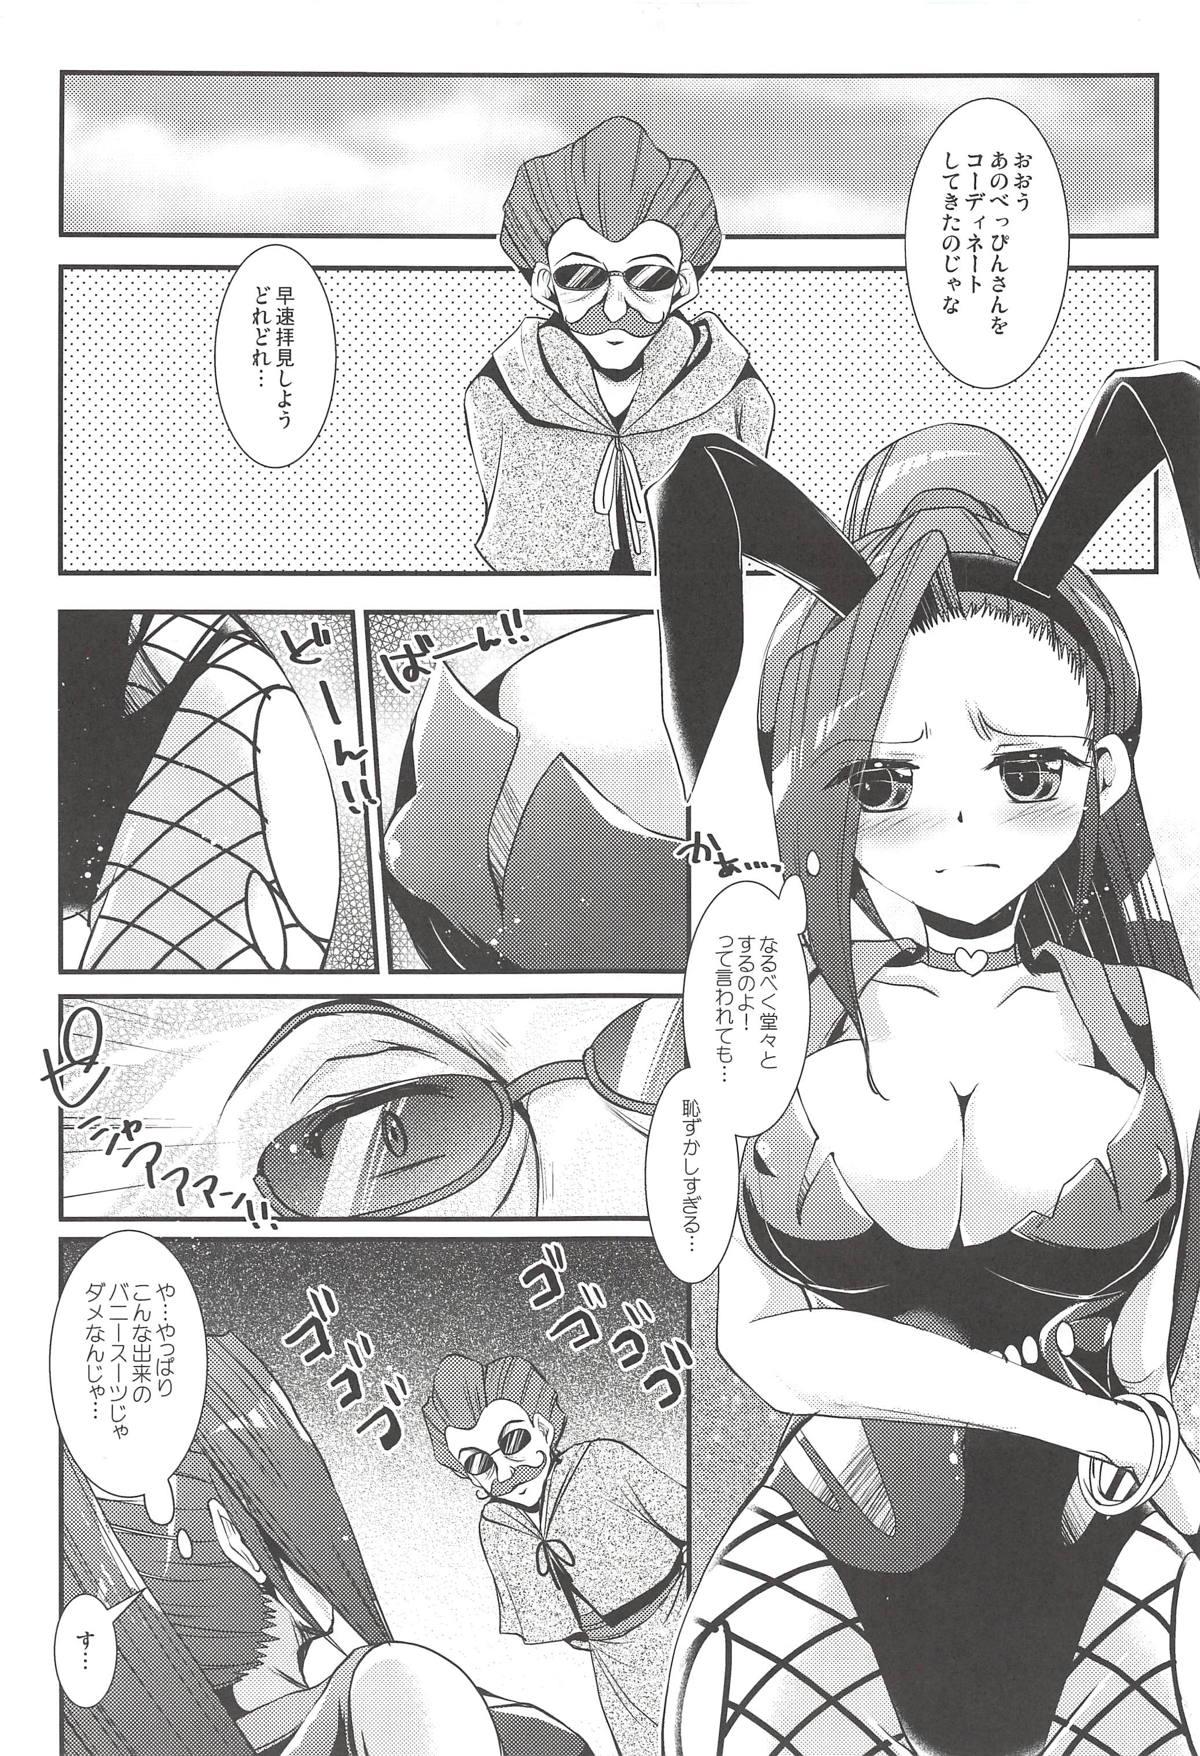 Suckingdick Shippai Bunny - Failure of Bunny Suit - Dragon quest xi Glam - Page 8